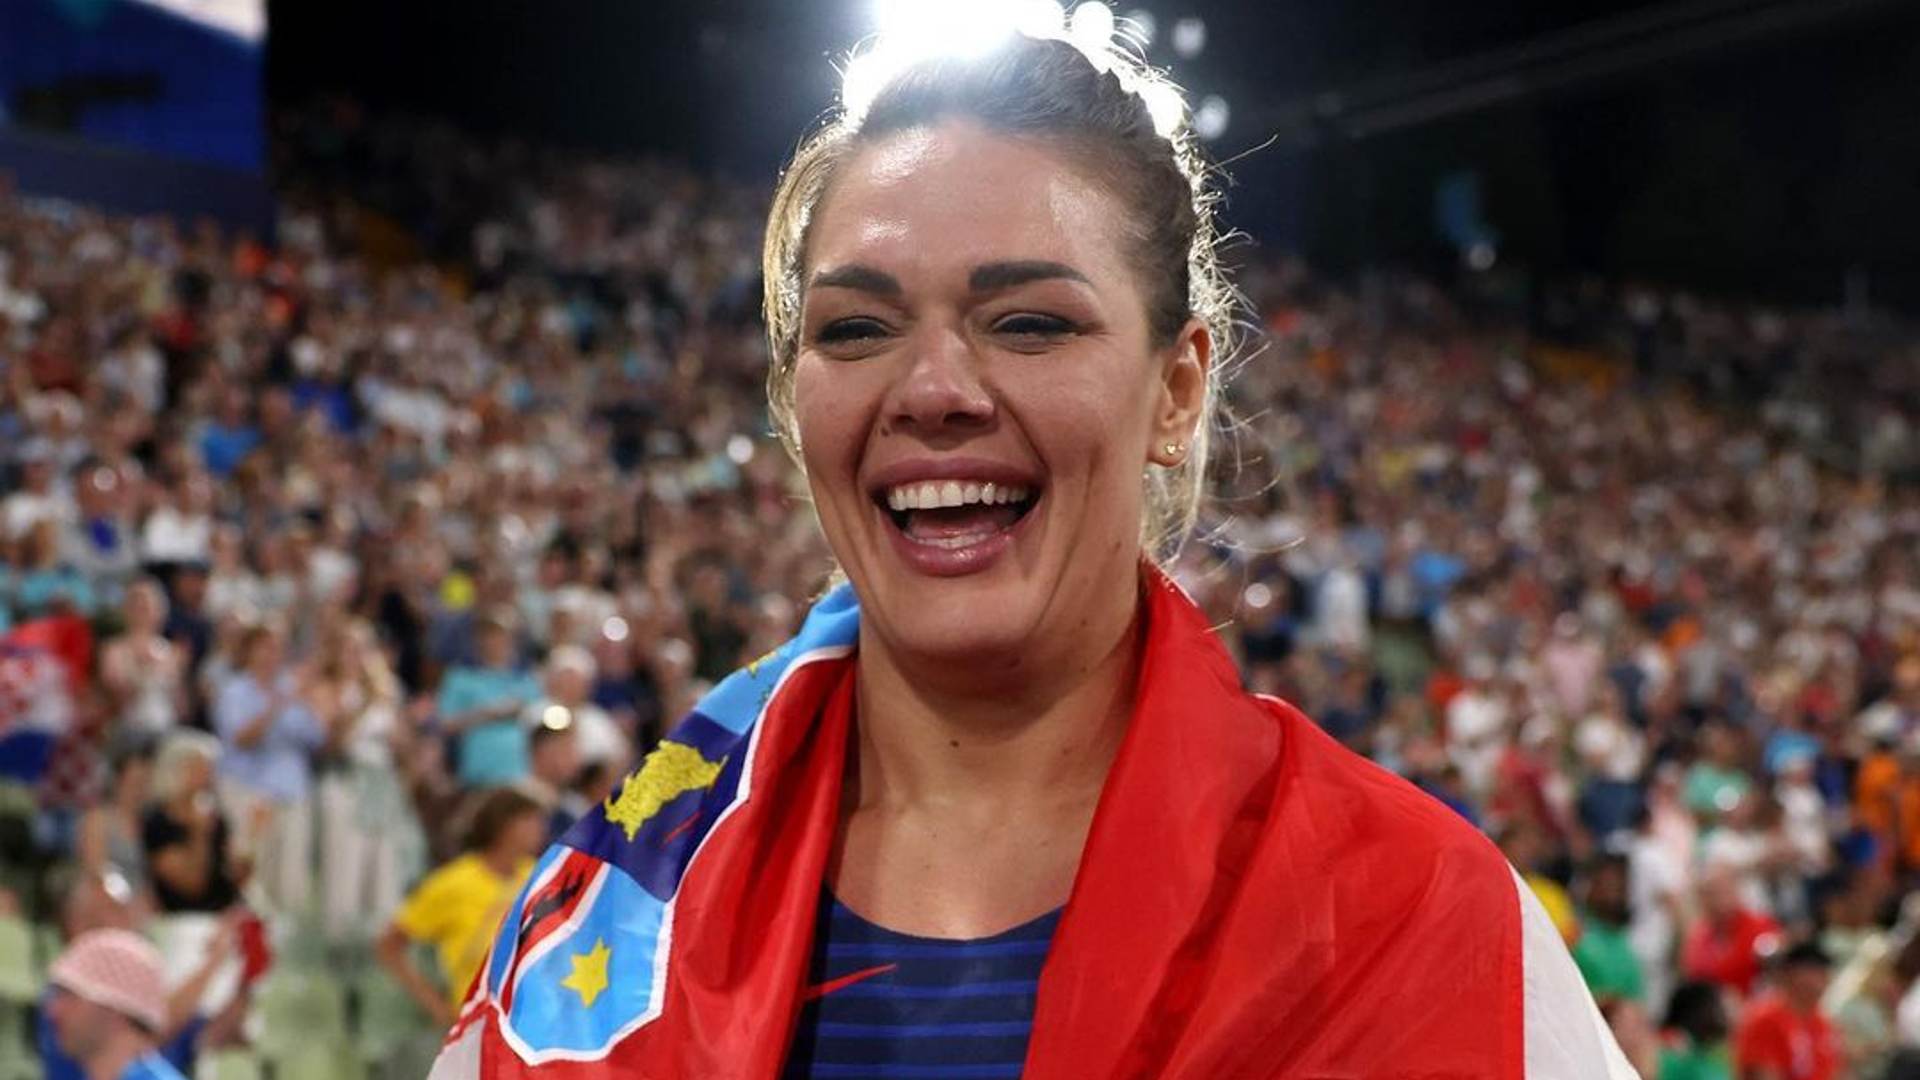 Sandra Perkovic all smiles after winning the European Championships 2022 (Image Credits - Instagram/@discus70queen)